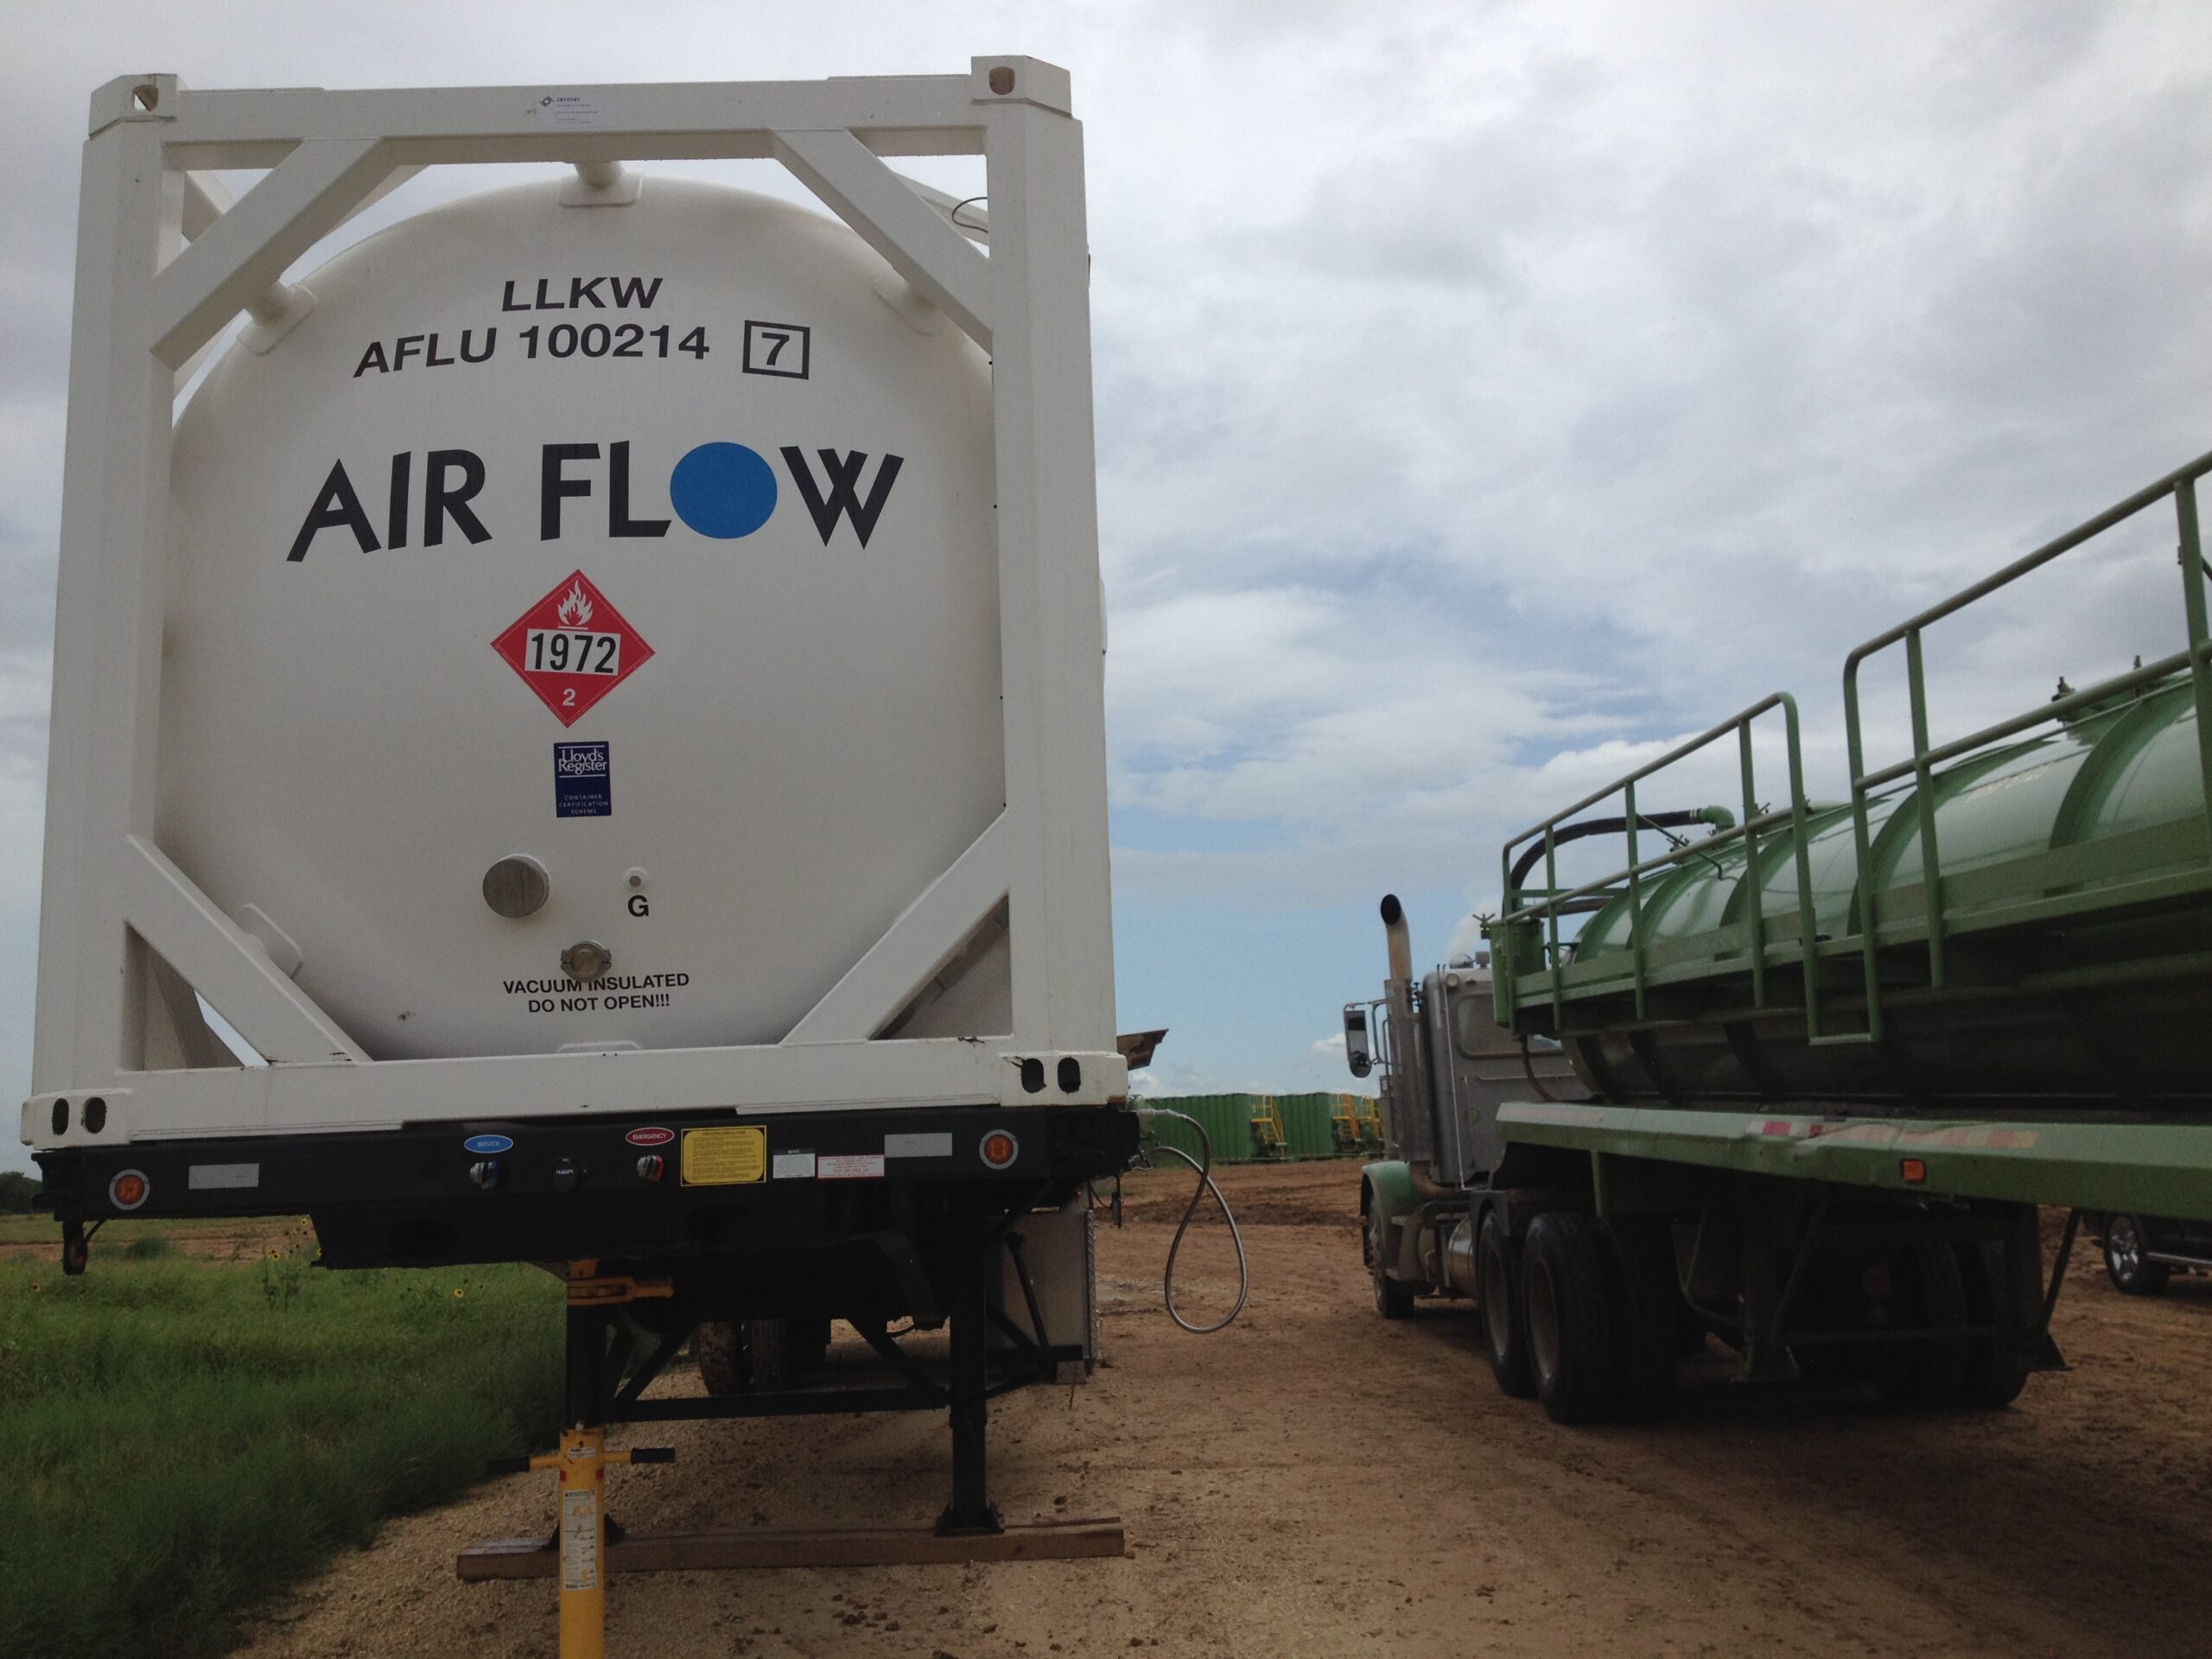 Air Flow ‘s 45ft iso tank container fueling LNG trucks-509x370